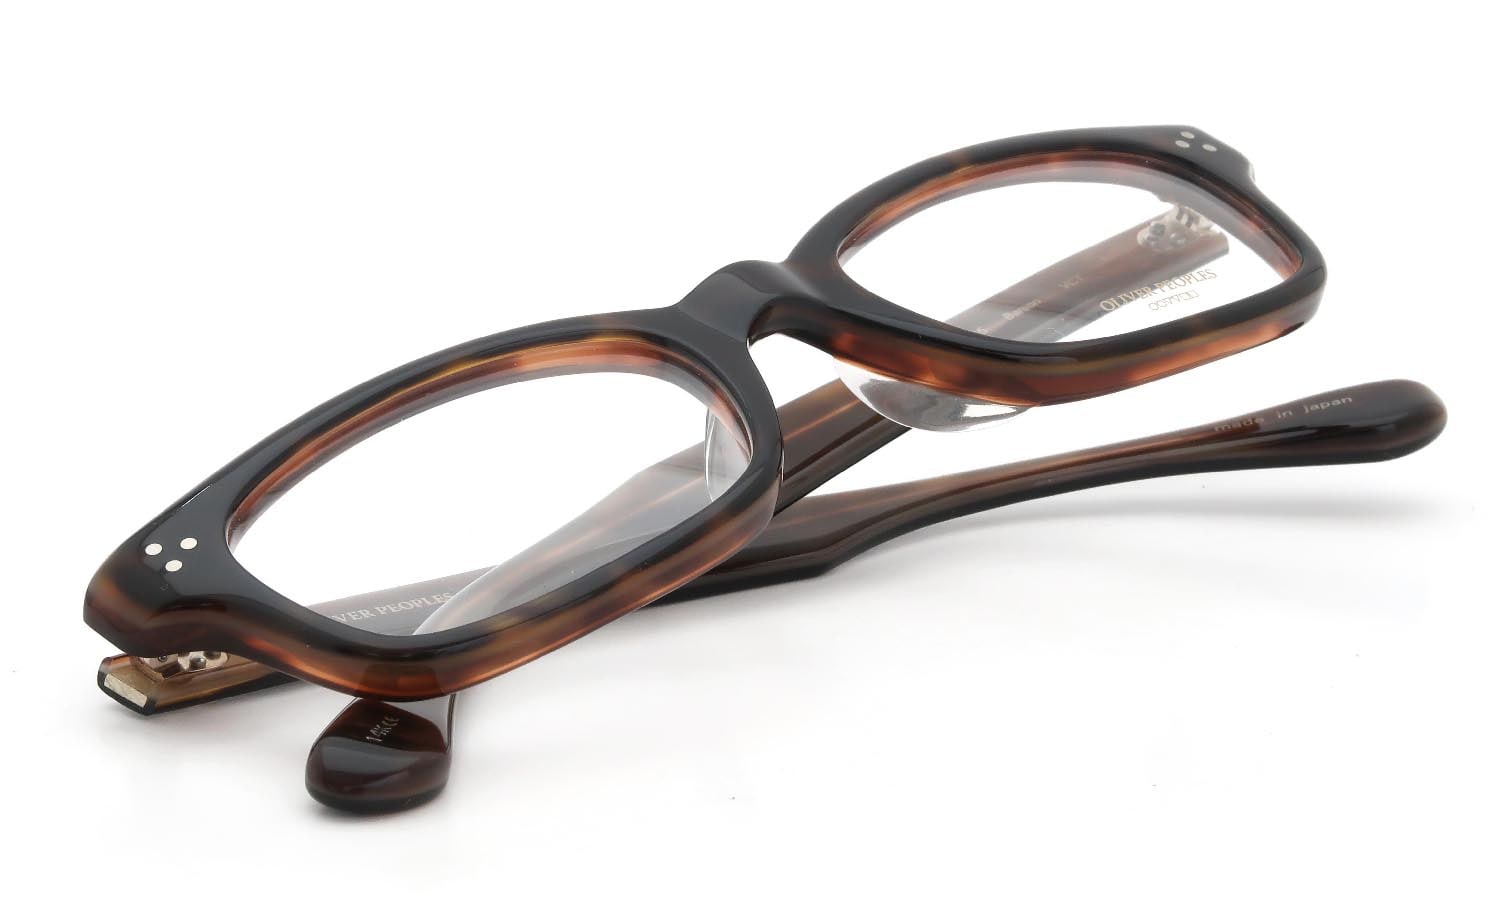 OLIVER PEOPLES Barson VCT